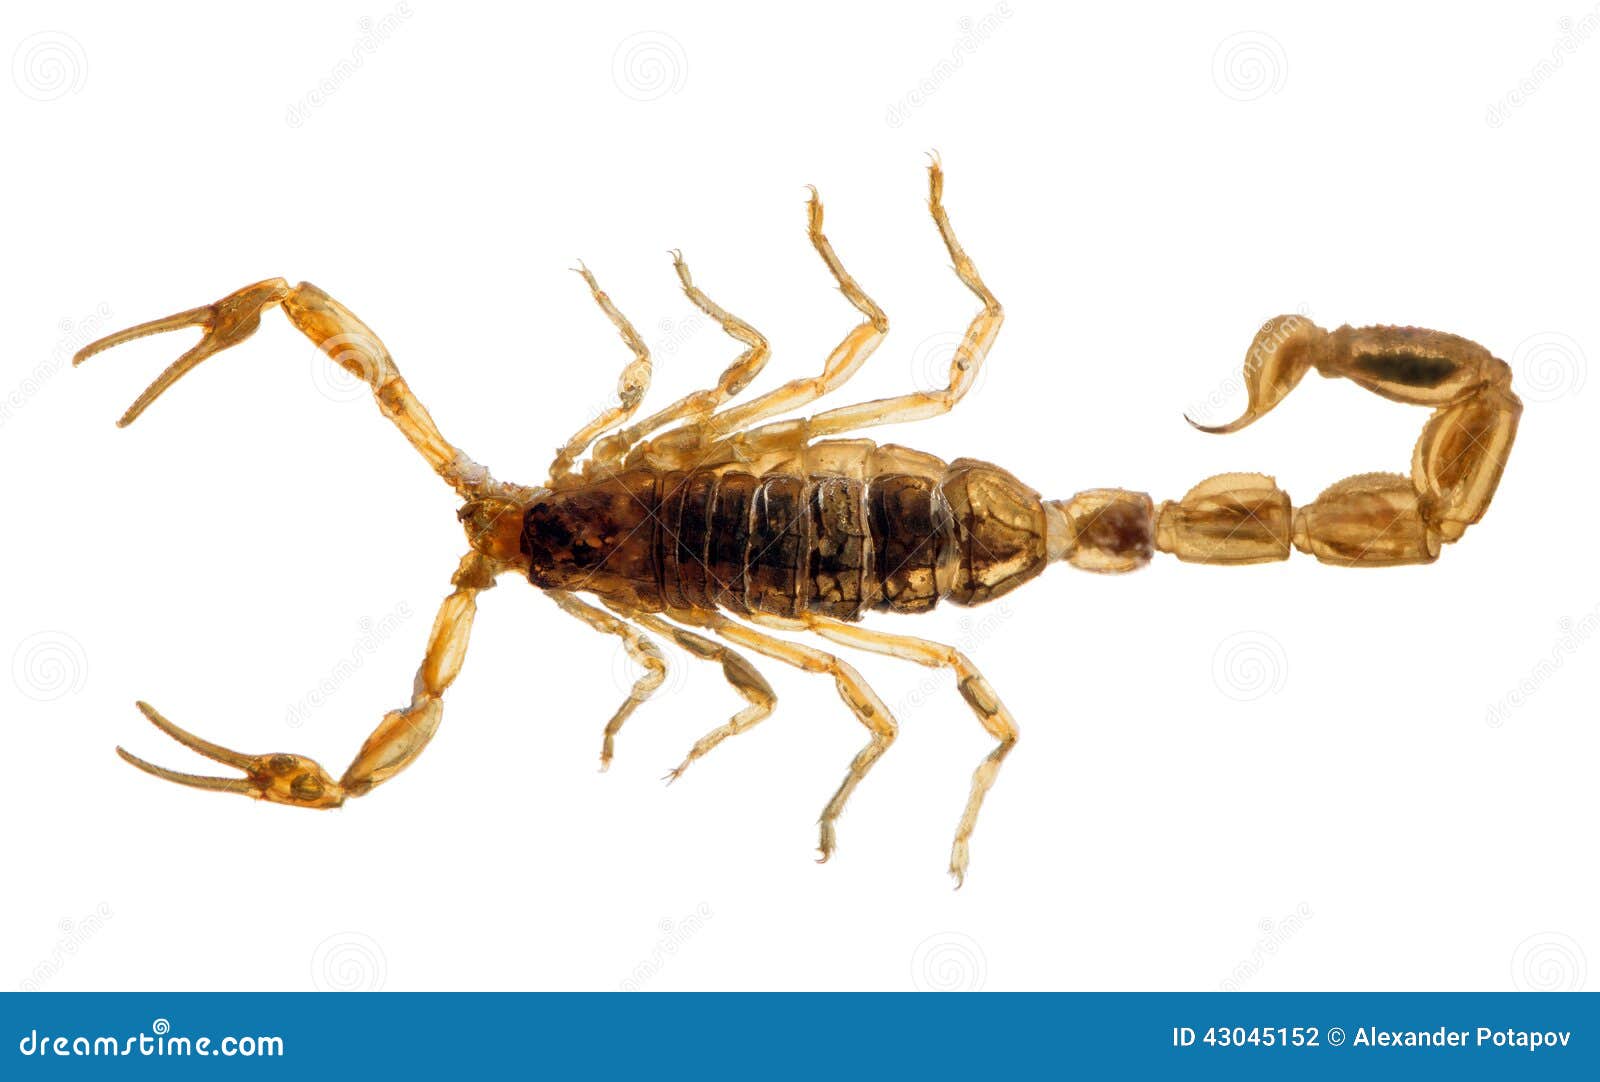 smallest scorpion in the world